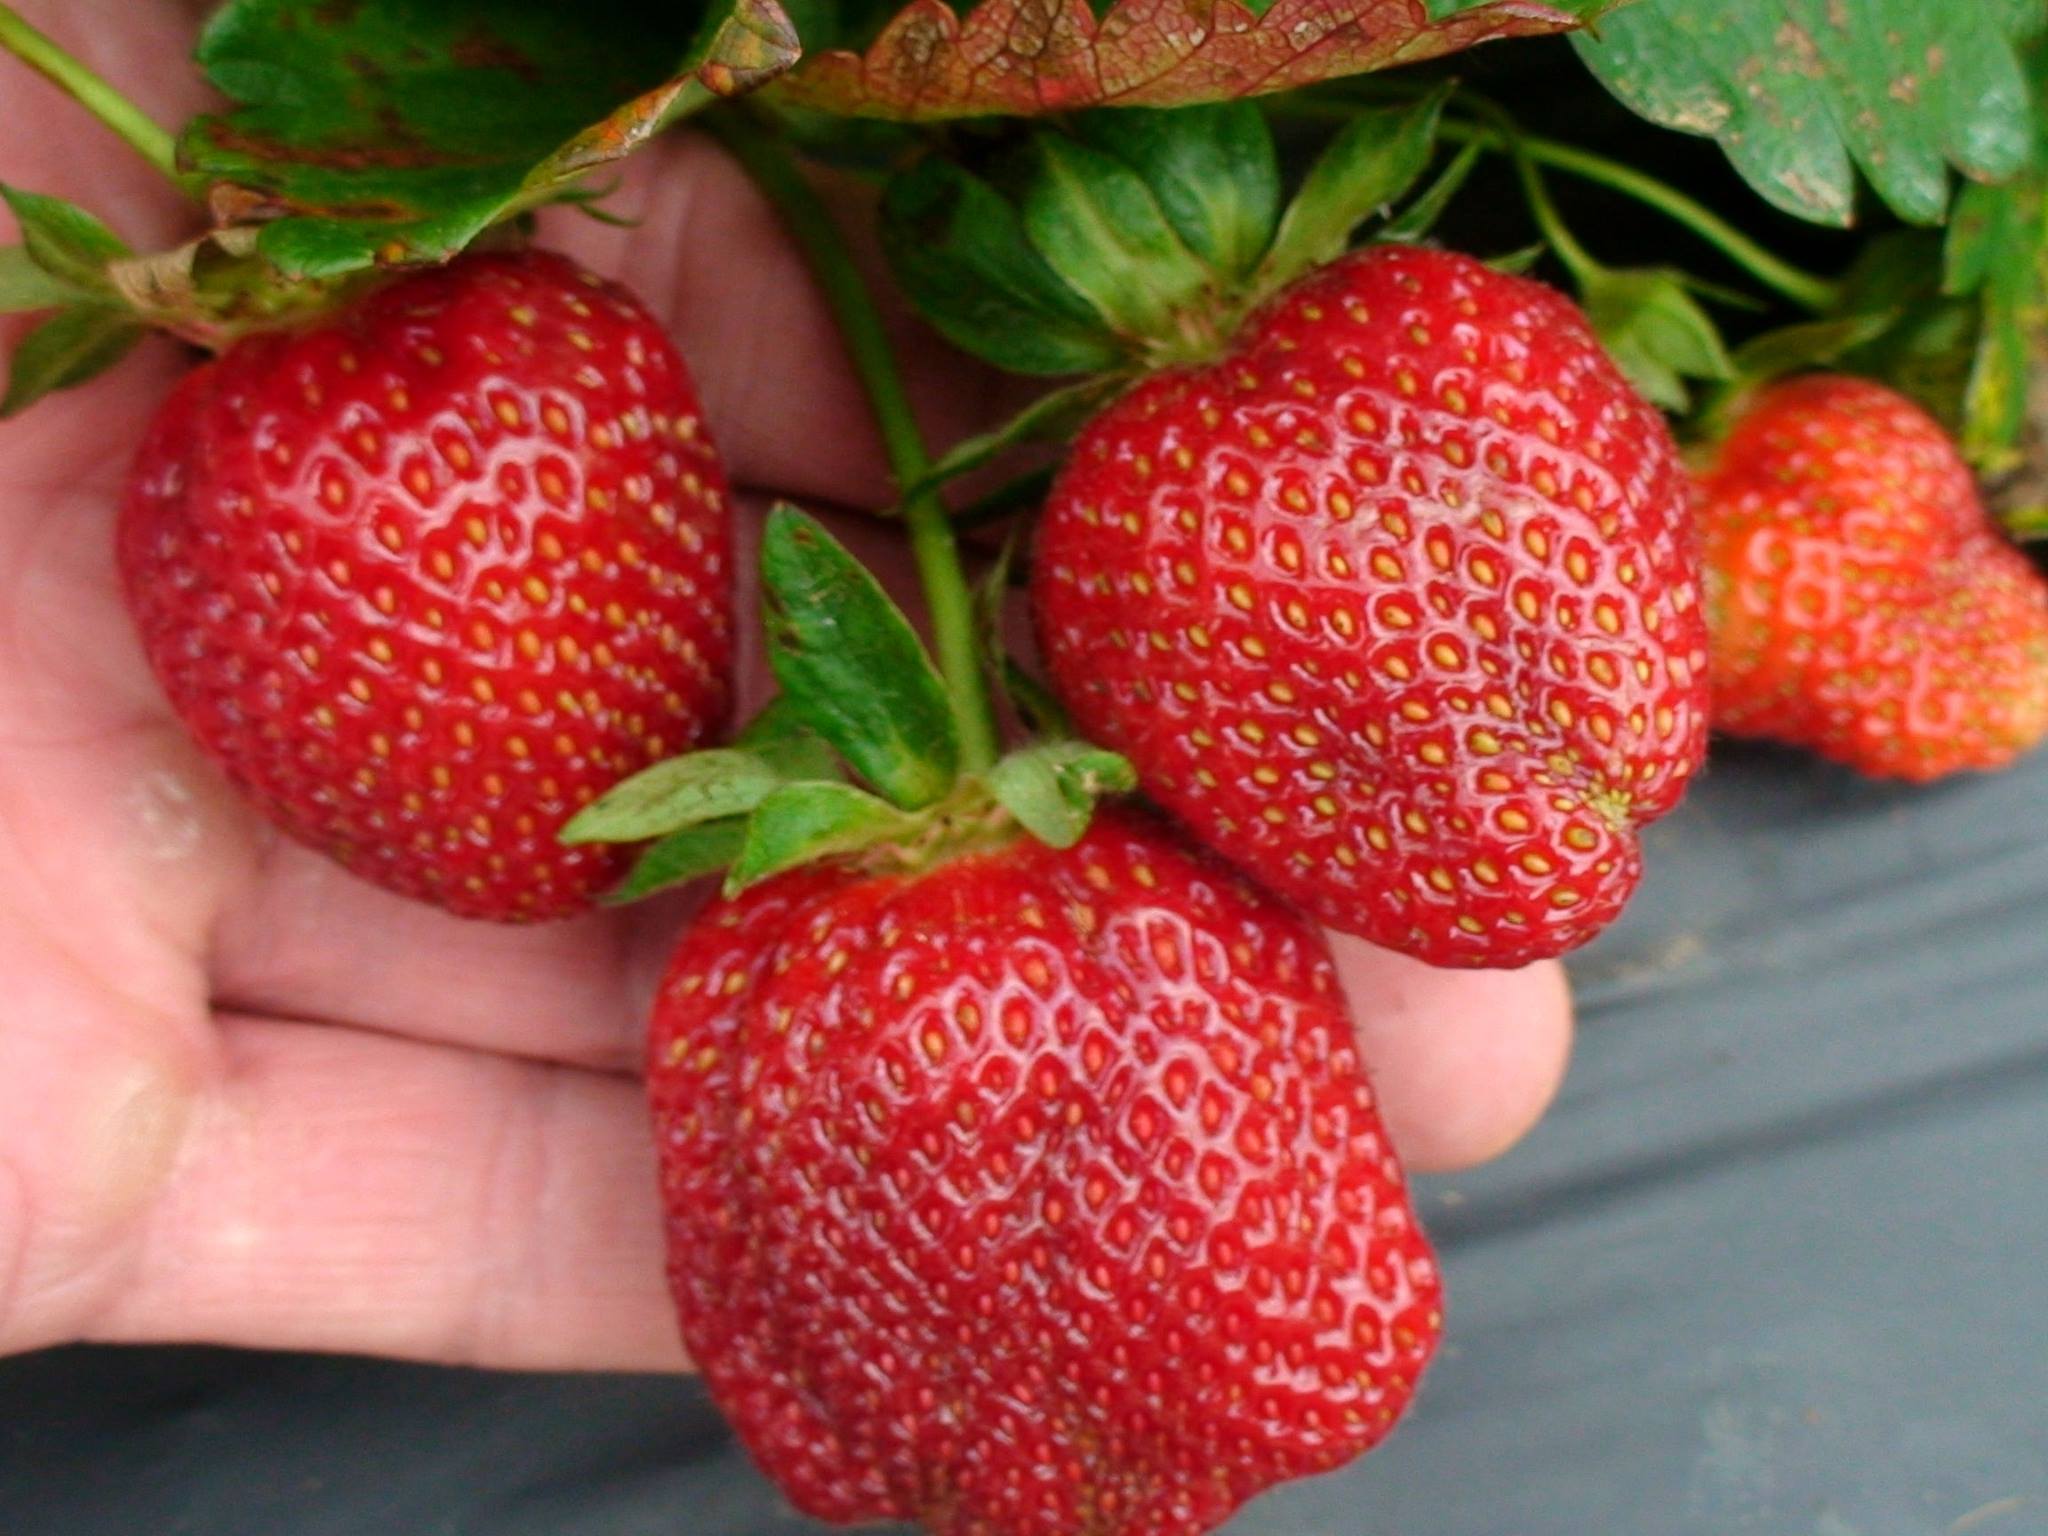 holmestead farm strawberry 11 awesome May events in Birmingham including Do Dah Day